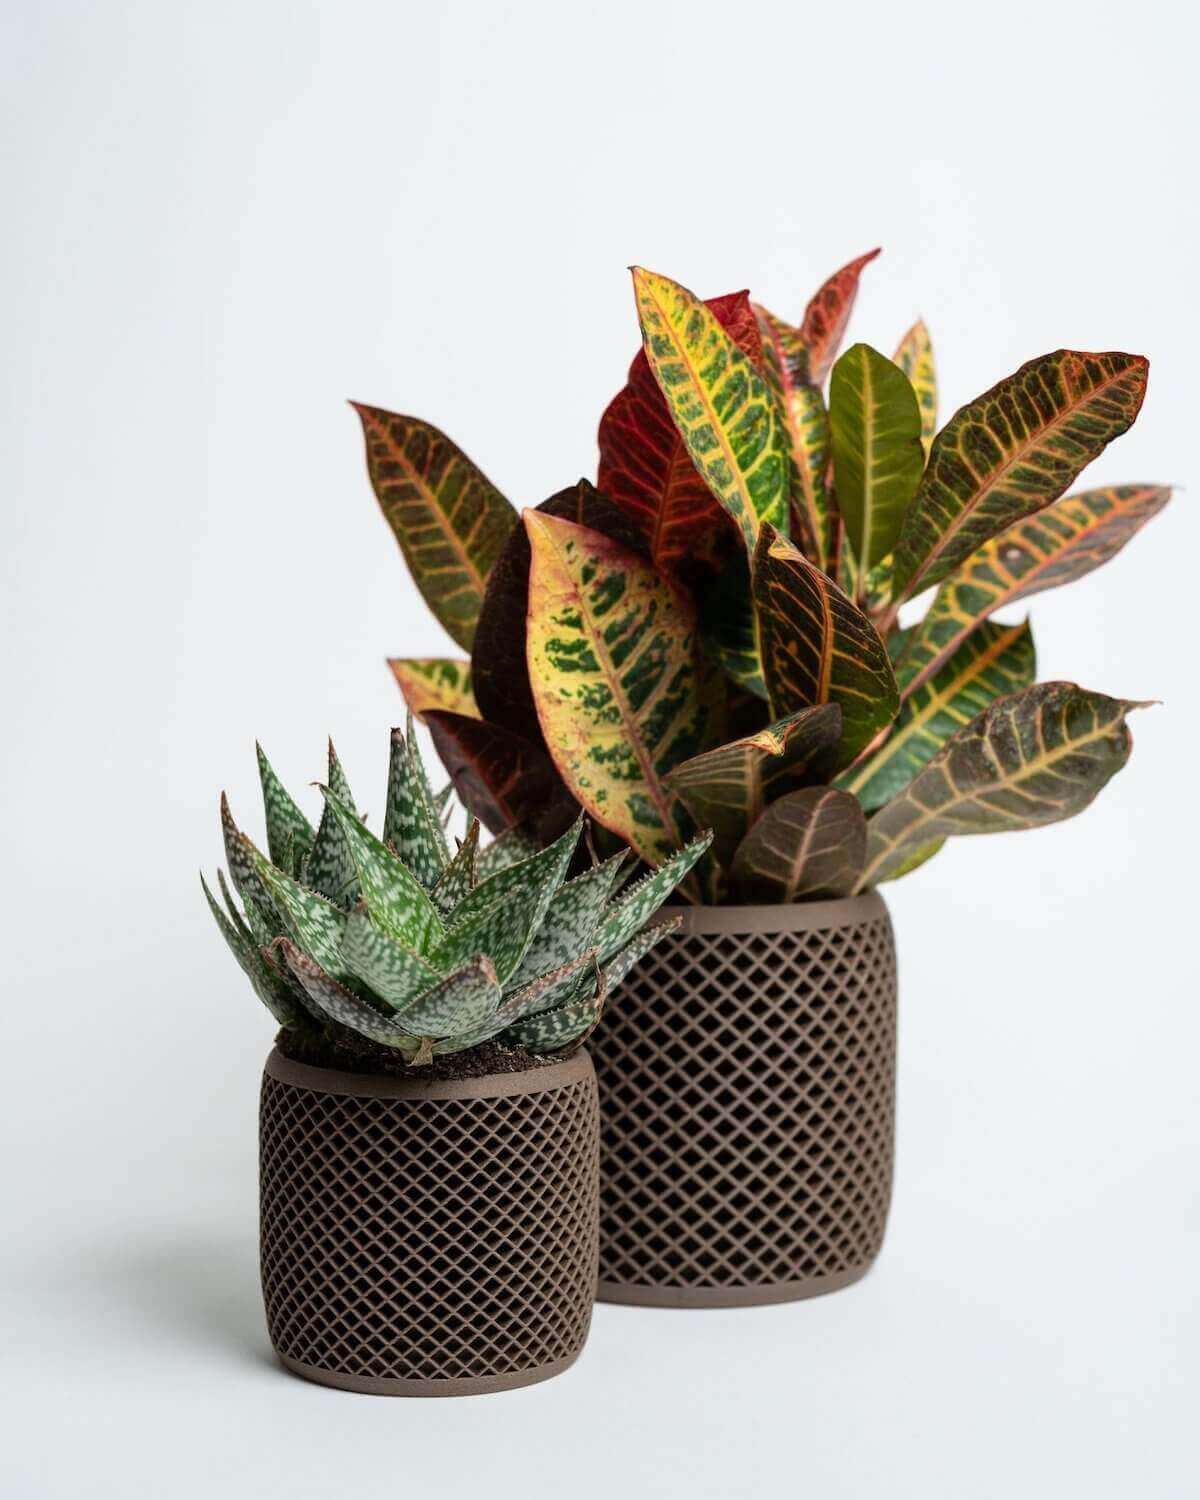 Modern planters | Unique Planters | Decor Planters from Woodland Pulse. Two brown pots for planting succulents.